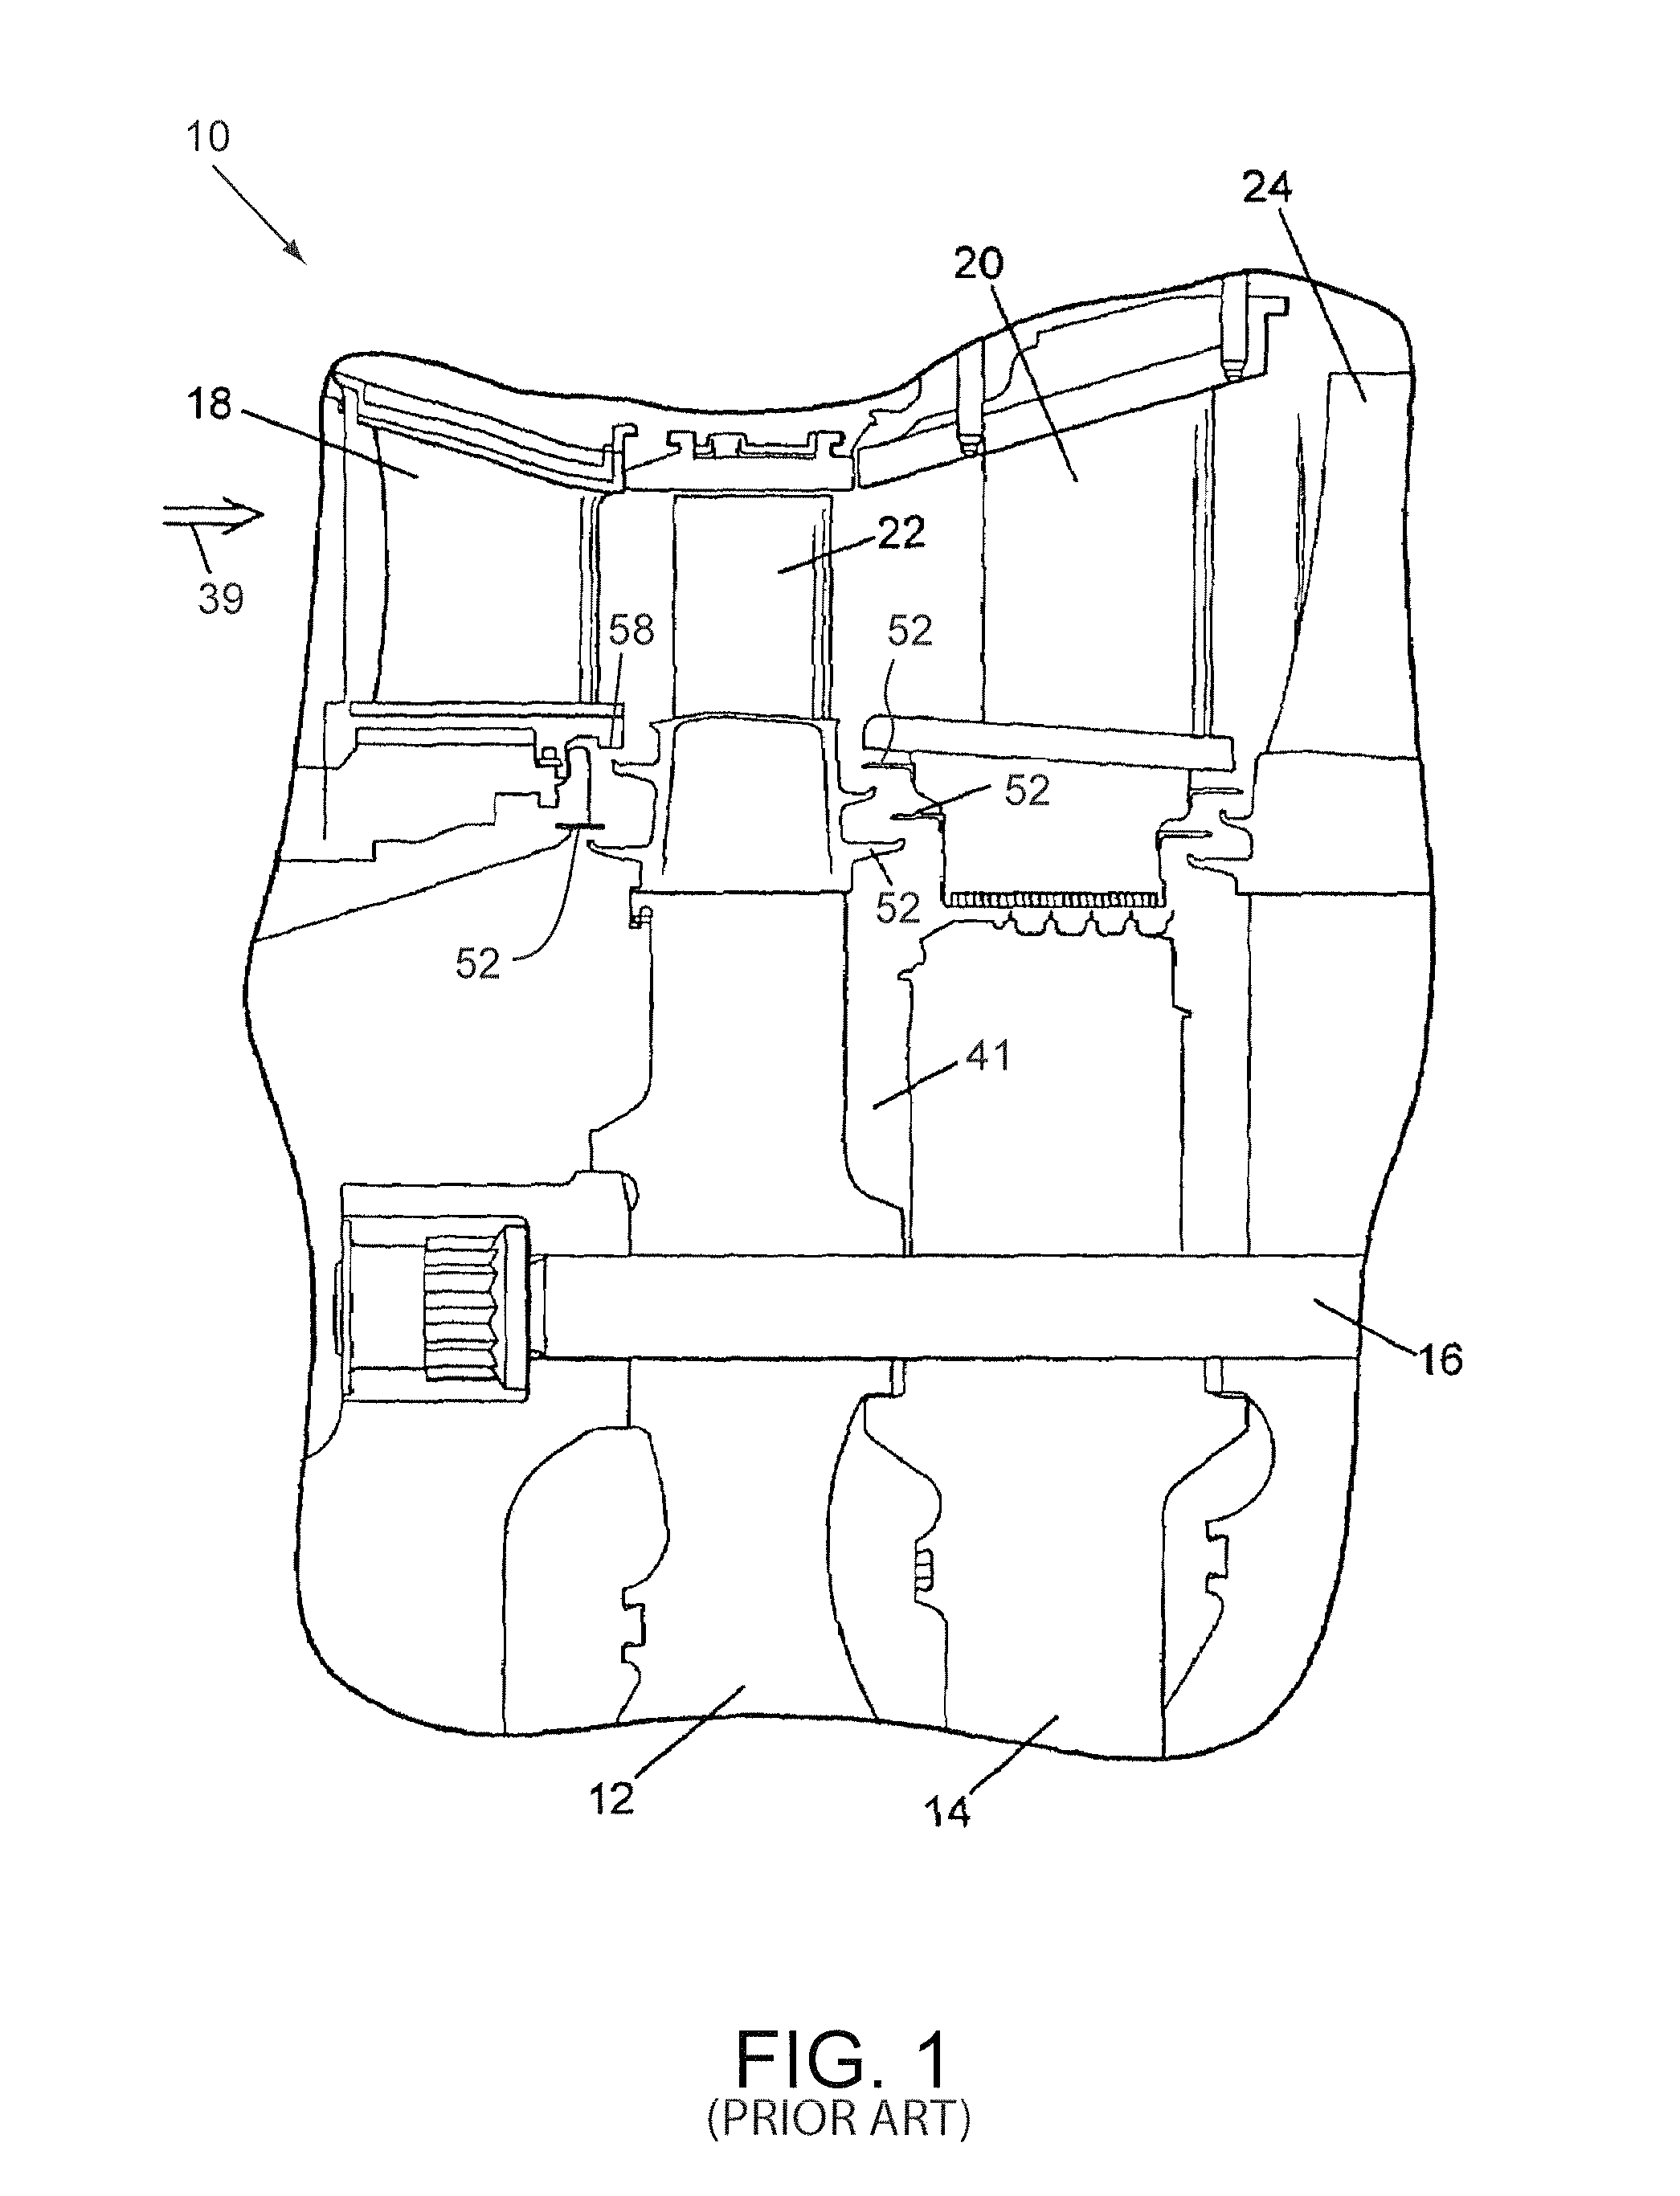 Turbine bucket angel wing features for forward cavity flow control and related method